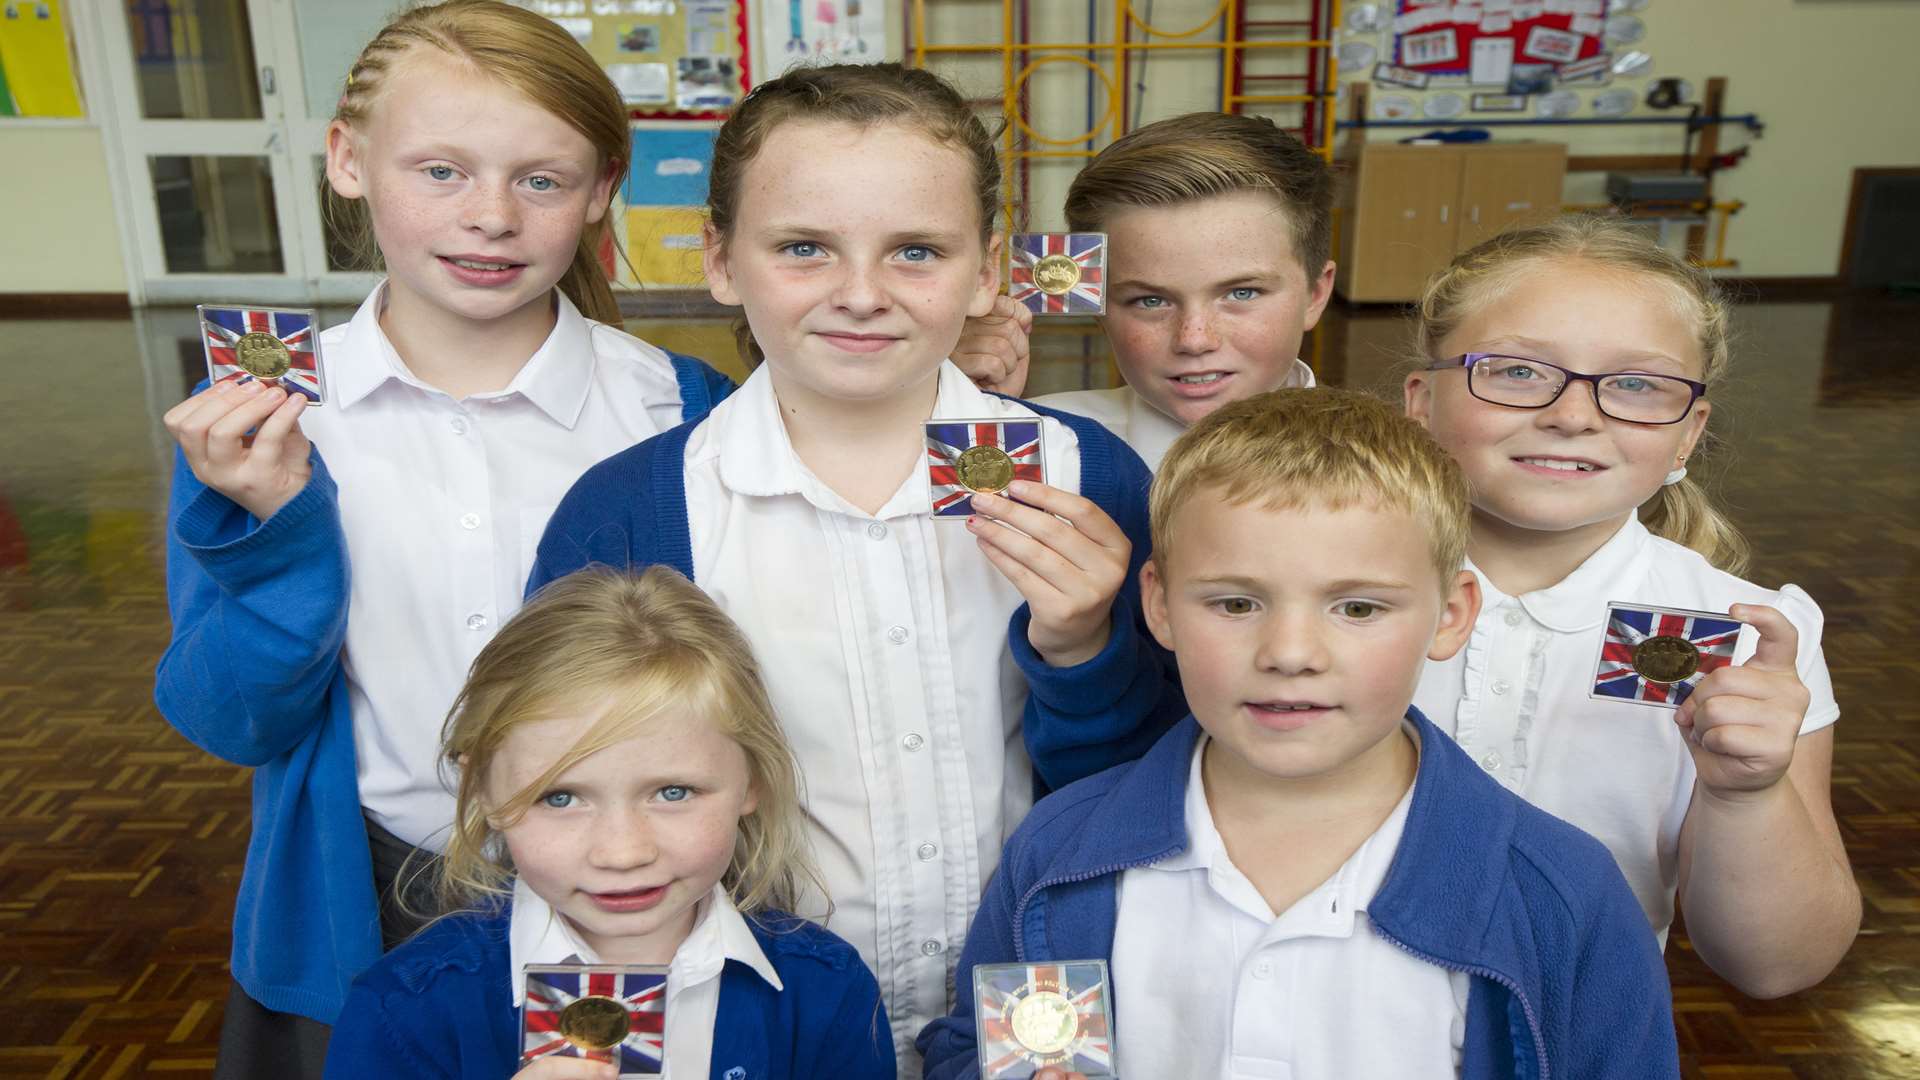 From left, back, Gracie, 10, Lola, 10, Joe, 10, and Ellie, 8. Front are Lacey, 6, and Alek, 7. Pupils of Halfway Houses Primary School, Halfway, Sheppey, are being presented with commemorative coins to mark the Queen becoming the longest reigning English monarch.